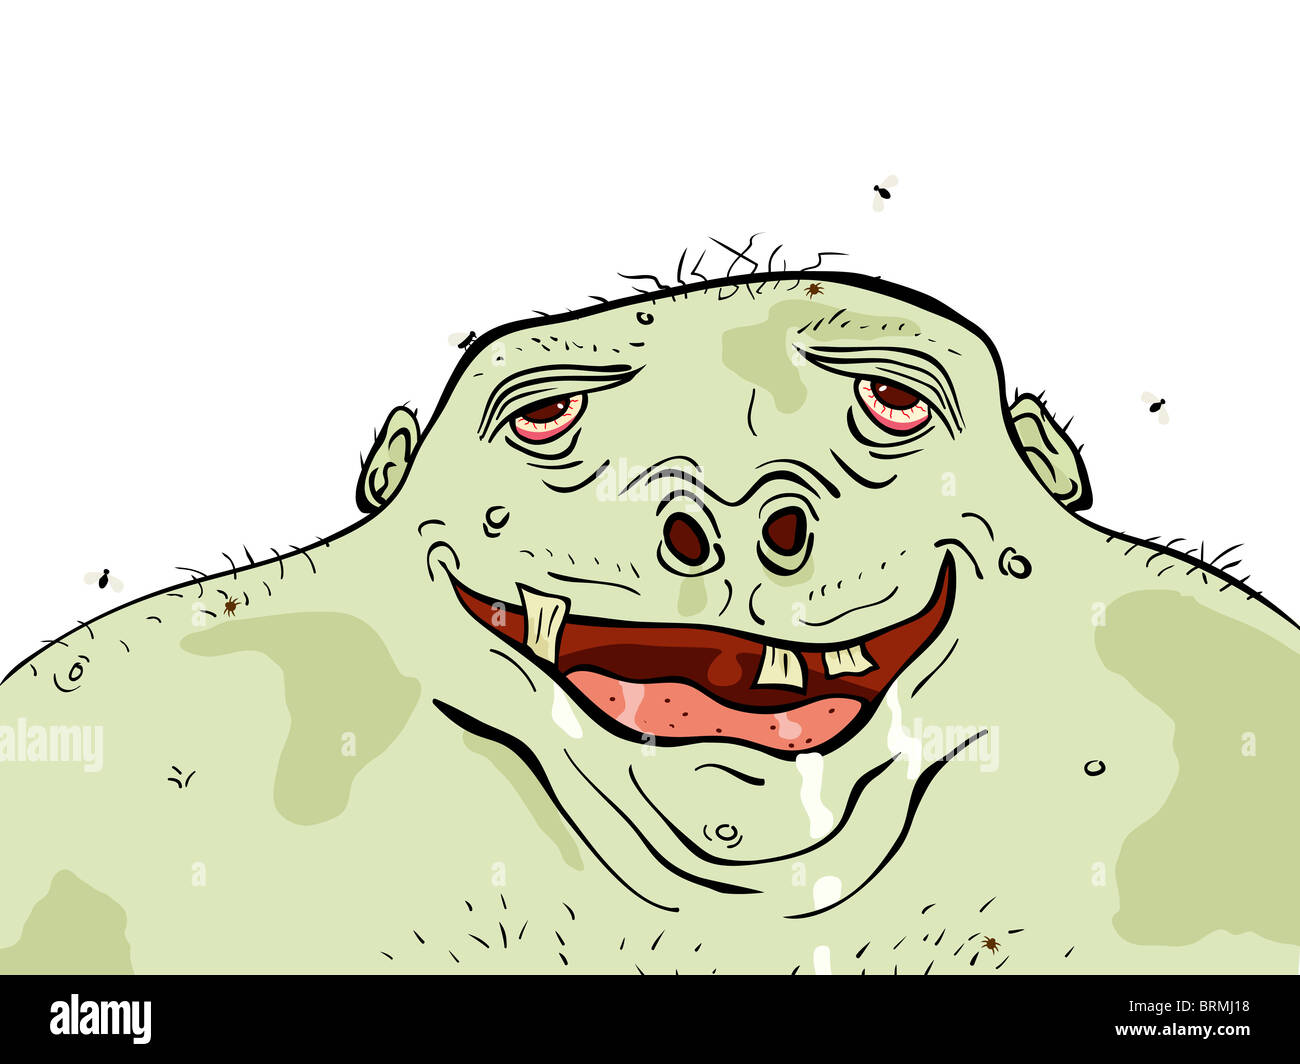 Illustration of an ugly but happy green man Stock Photo